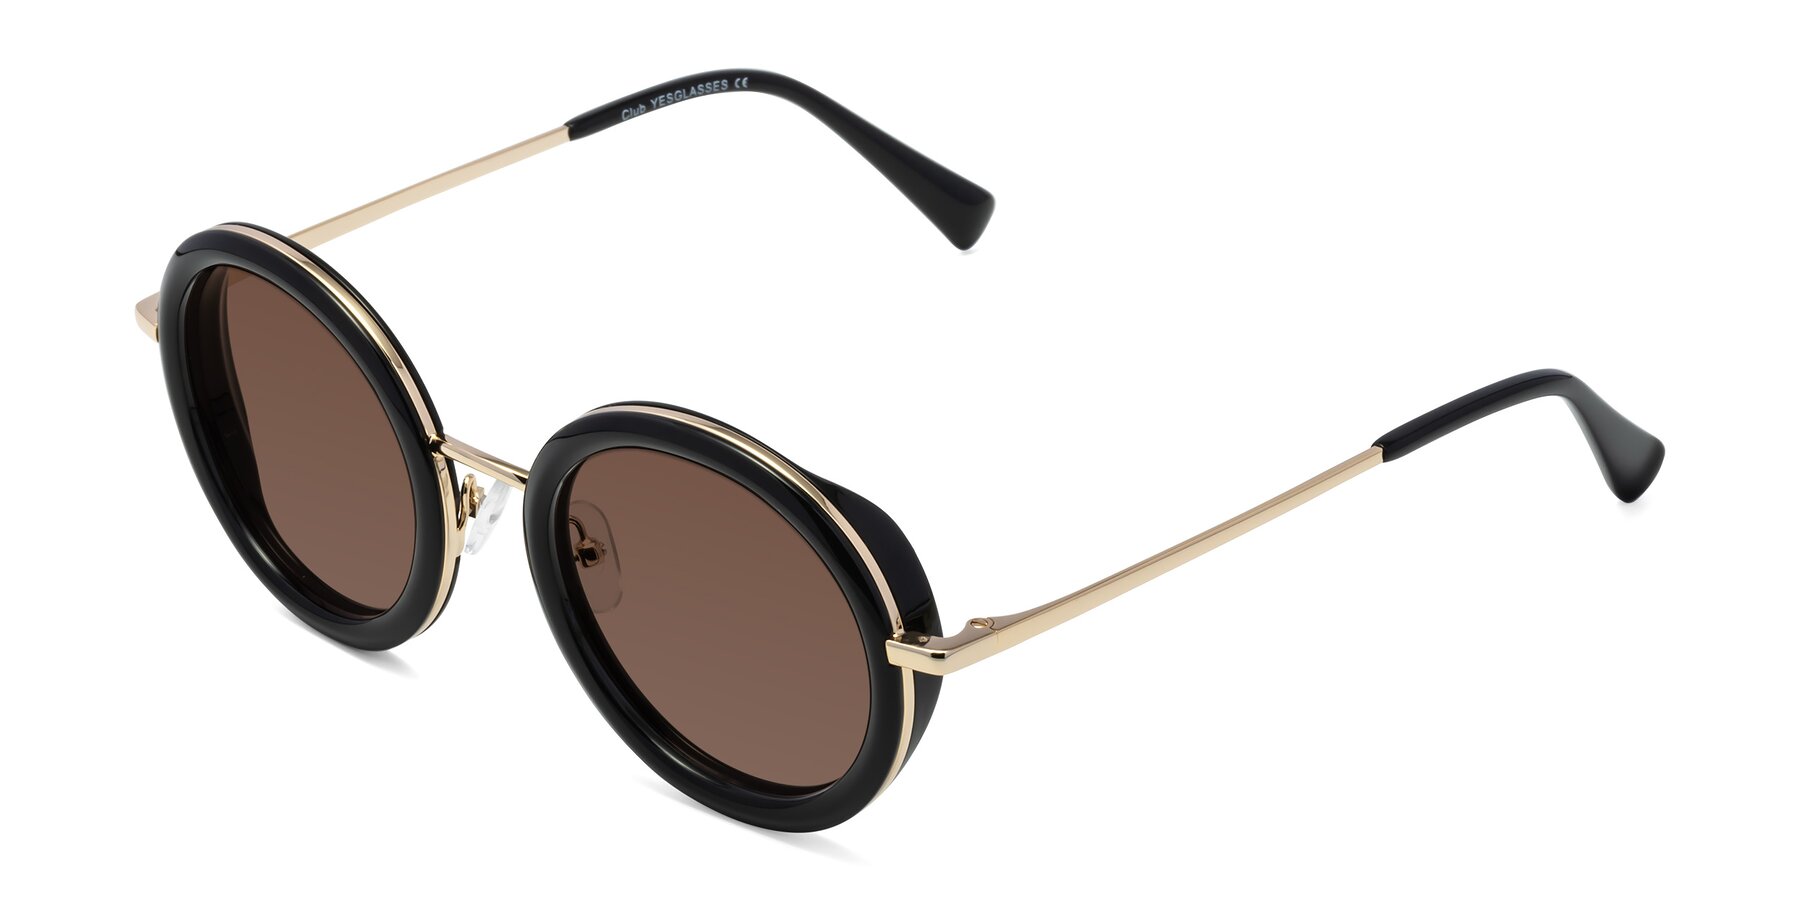 Angle of Club in Black-Gold with Brown Tinted Lenses